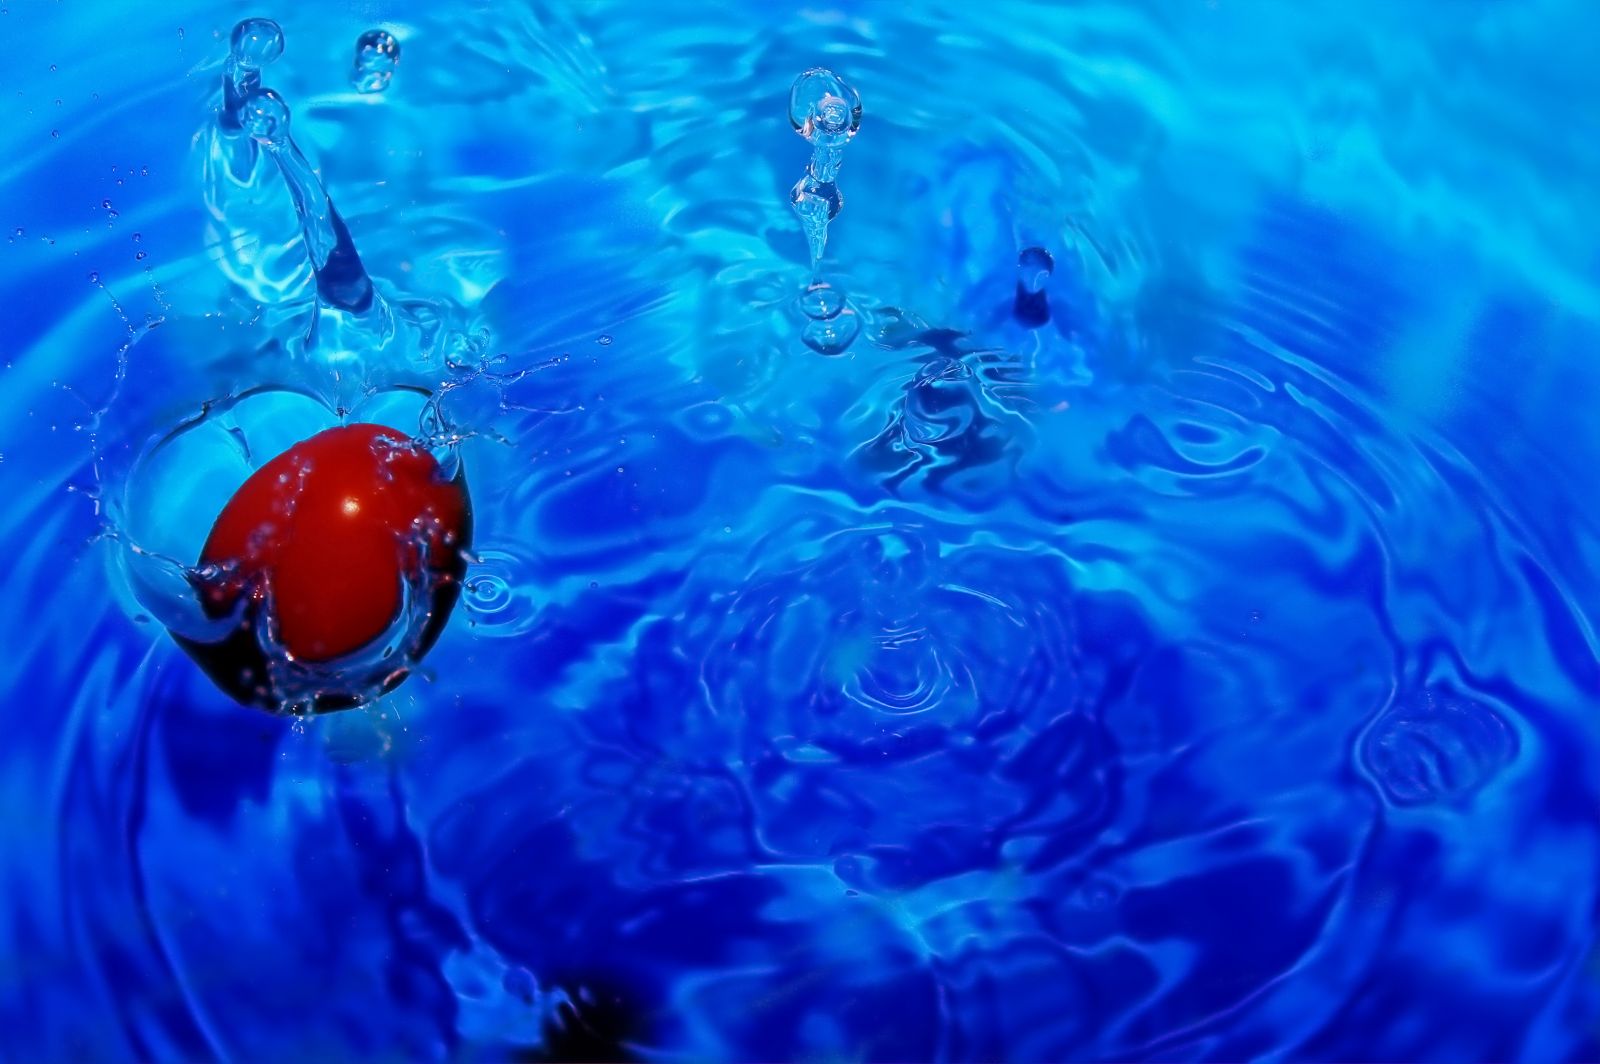 Blue Water, Red Tomato.